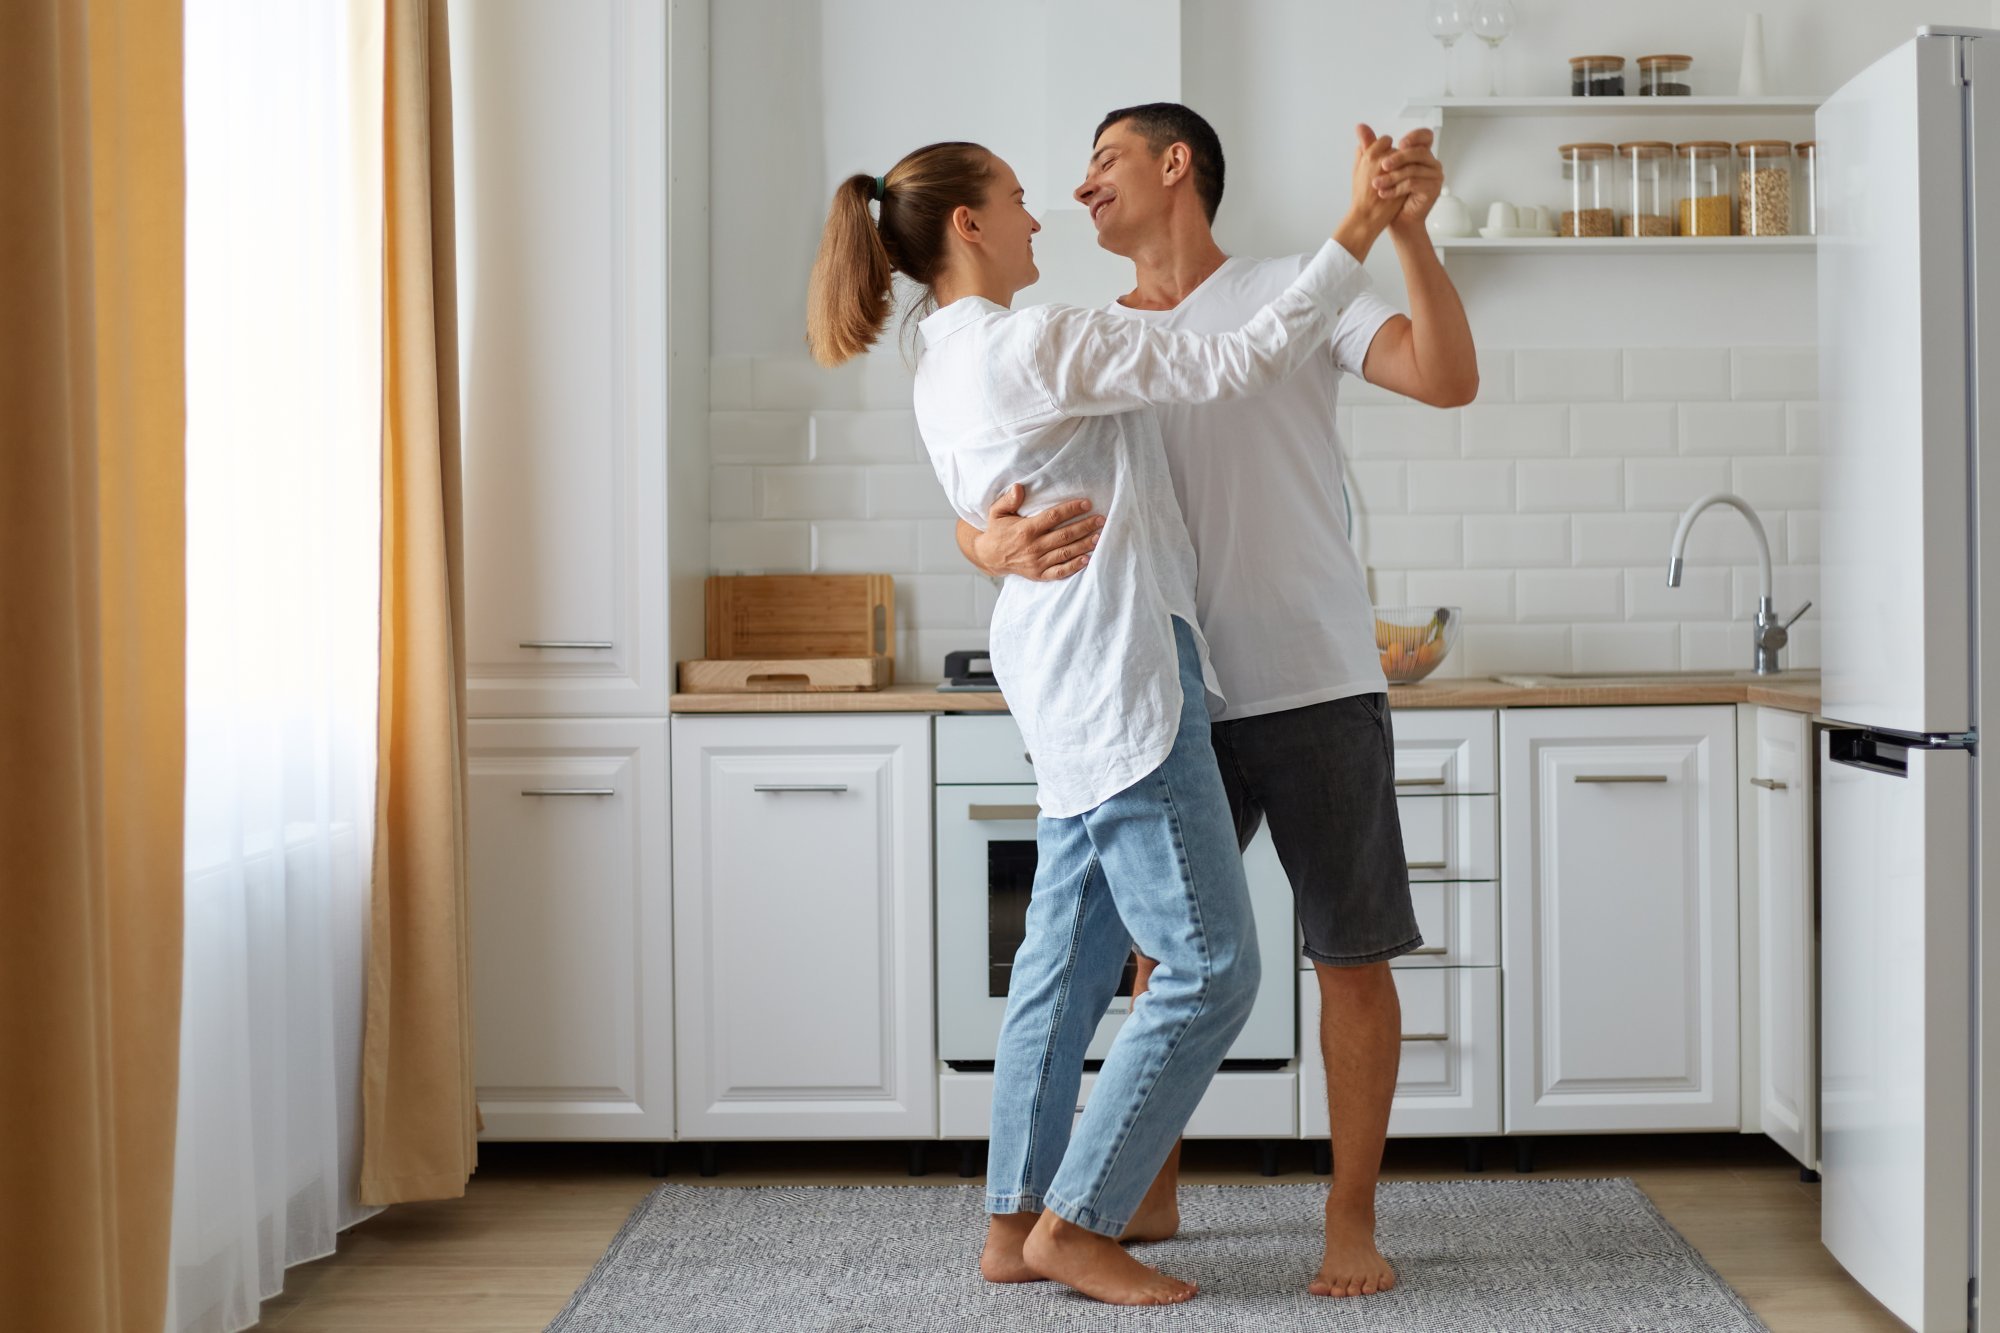 full-length-portrait-happy-smiling-husband-wife-dancing-together-home-light-room-with-kitchen-set-fridge-window-background-happy-couple.jpg